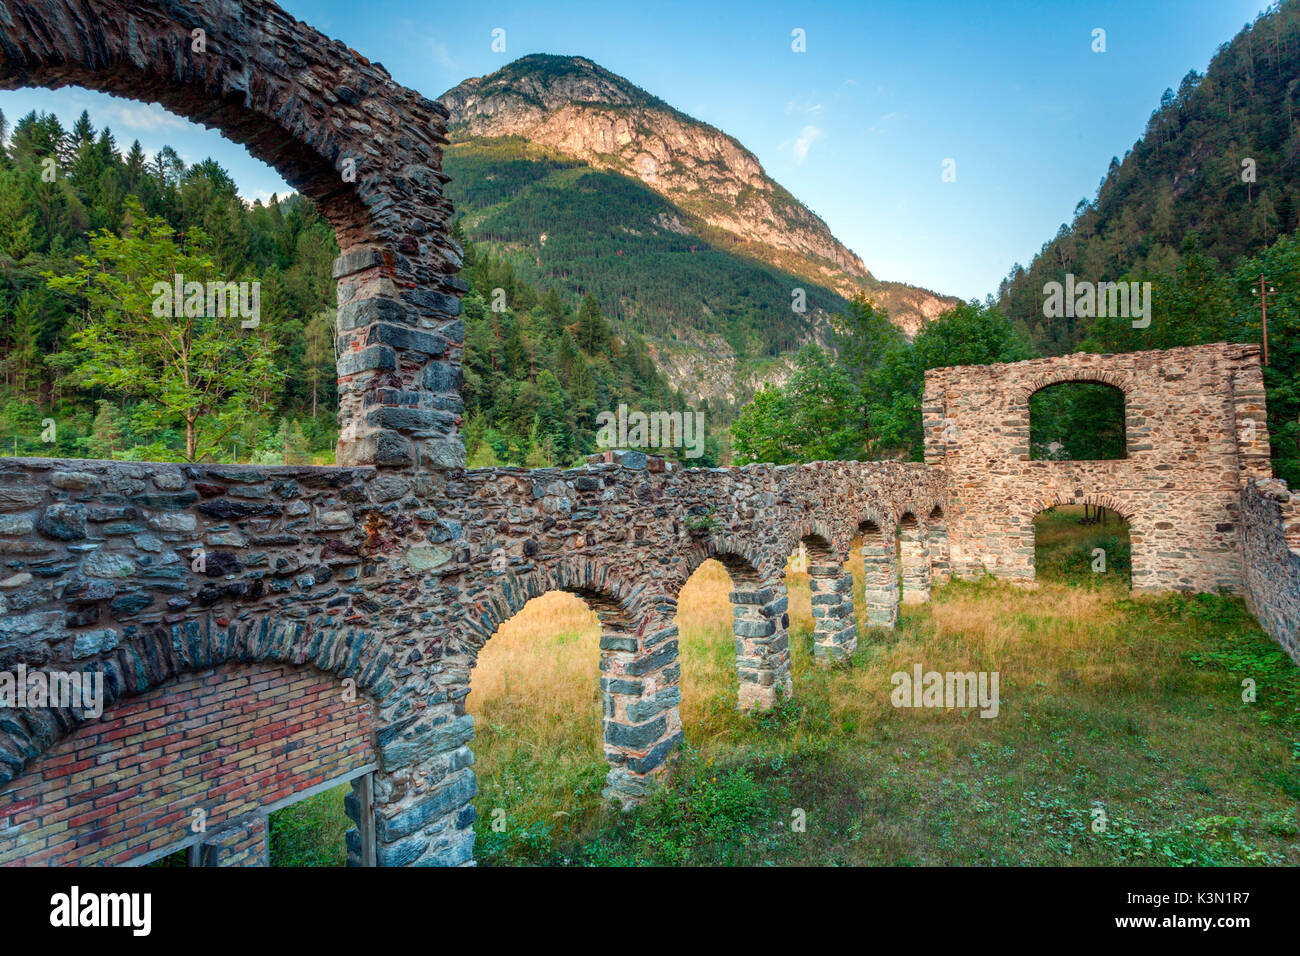 The perimeter walls still standing of the carbonyl warehouses in the mining center of Valle Imperina, National Park of the Belluno Dolomites, Rivamonte Agordino. Stock Photo